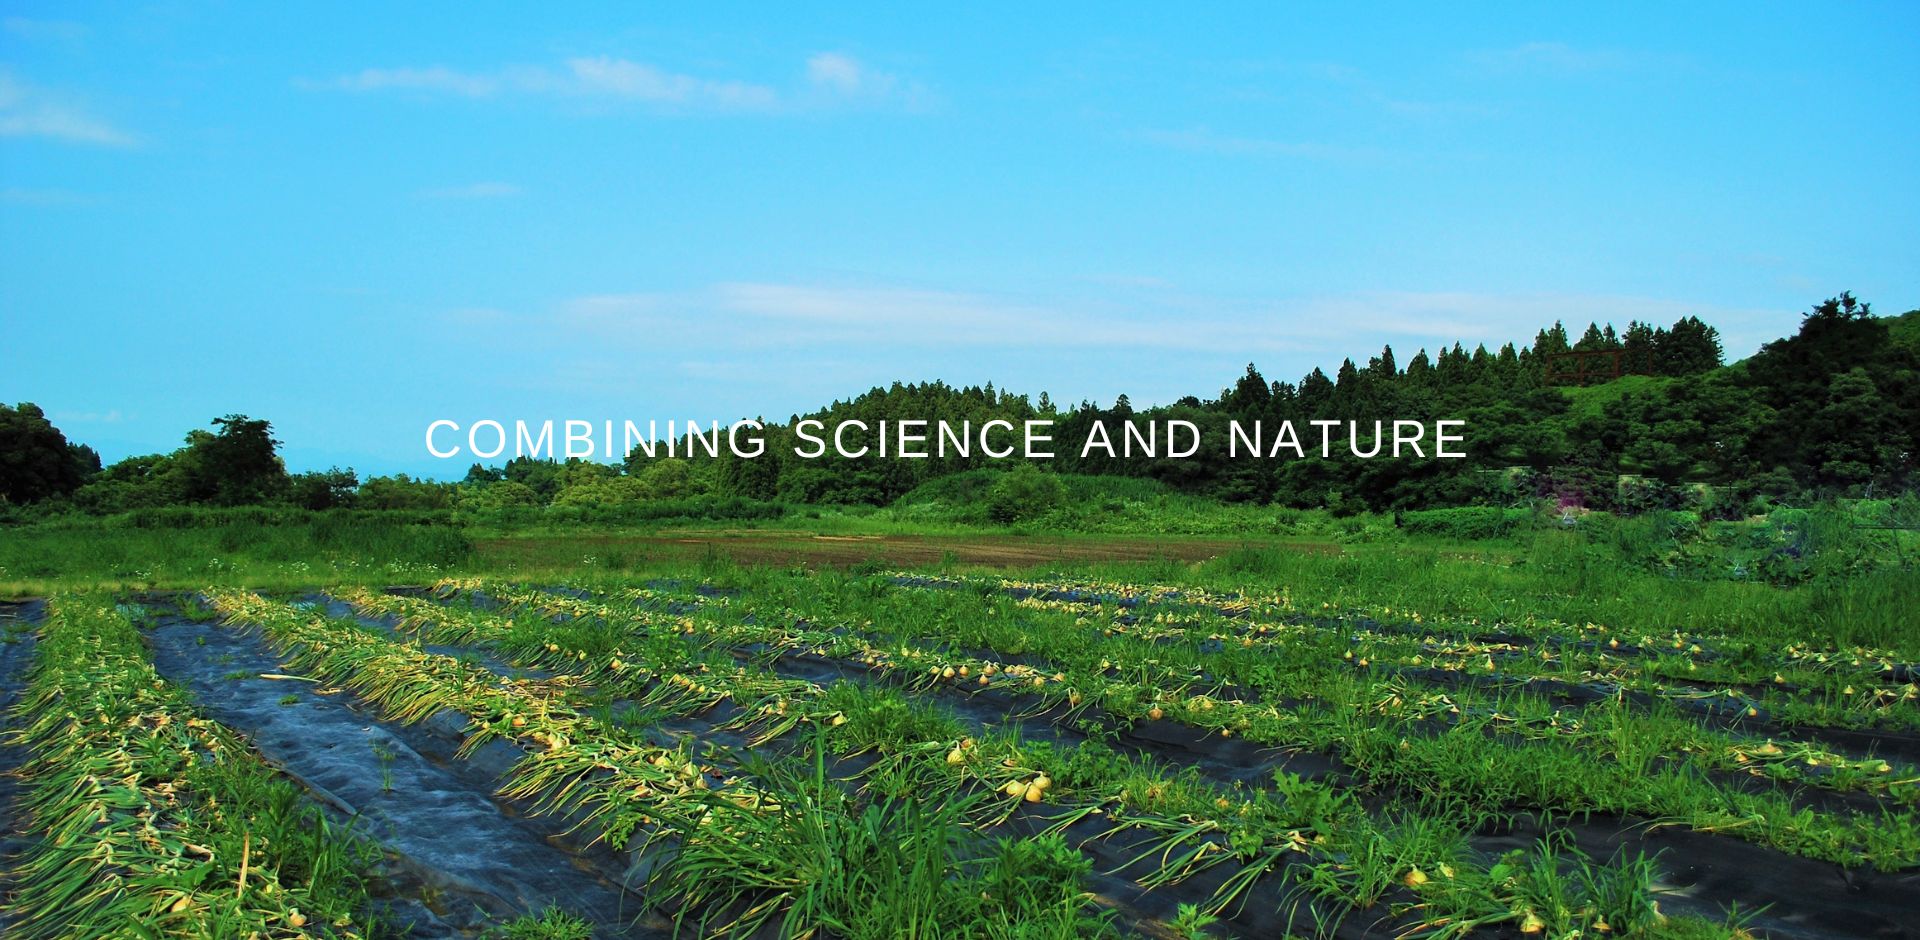 Koso Med Combining science and nature